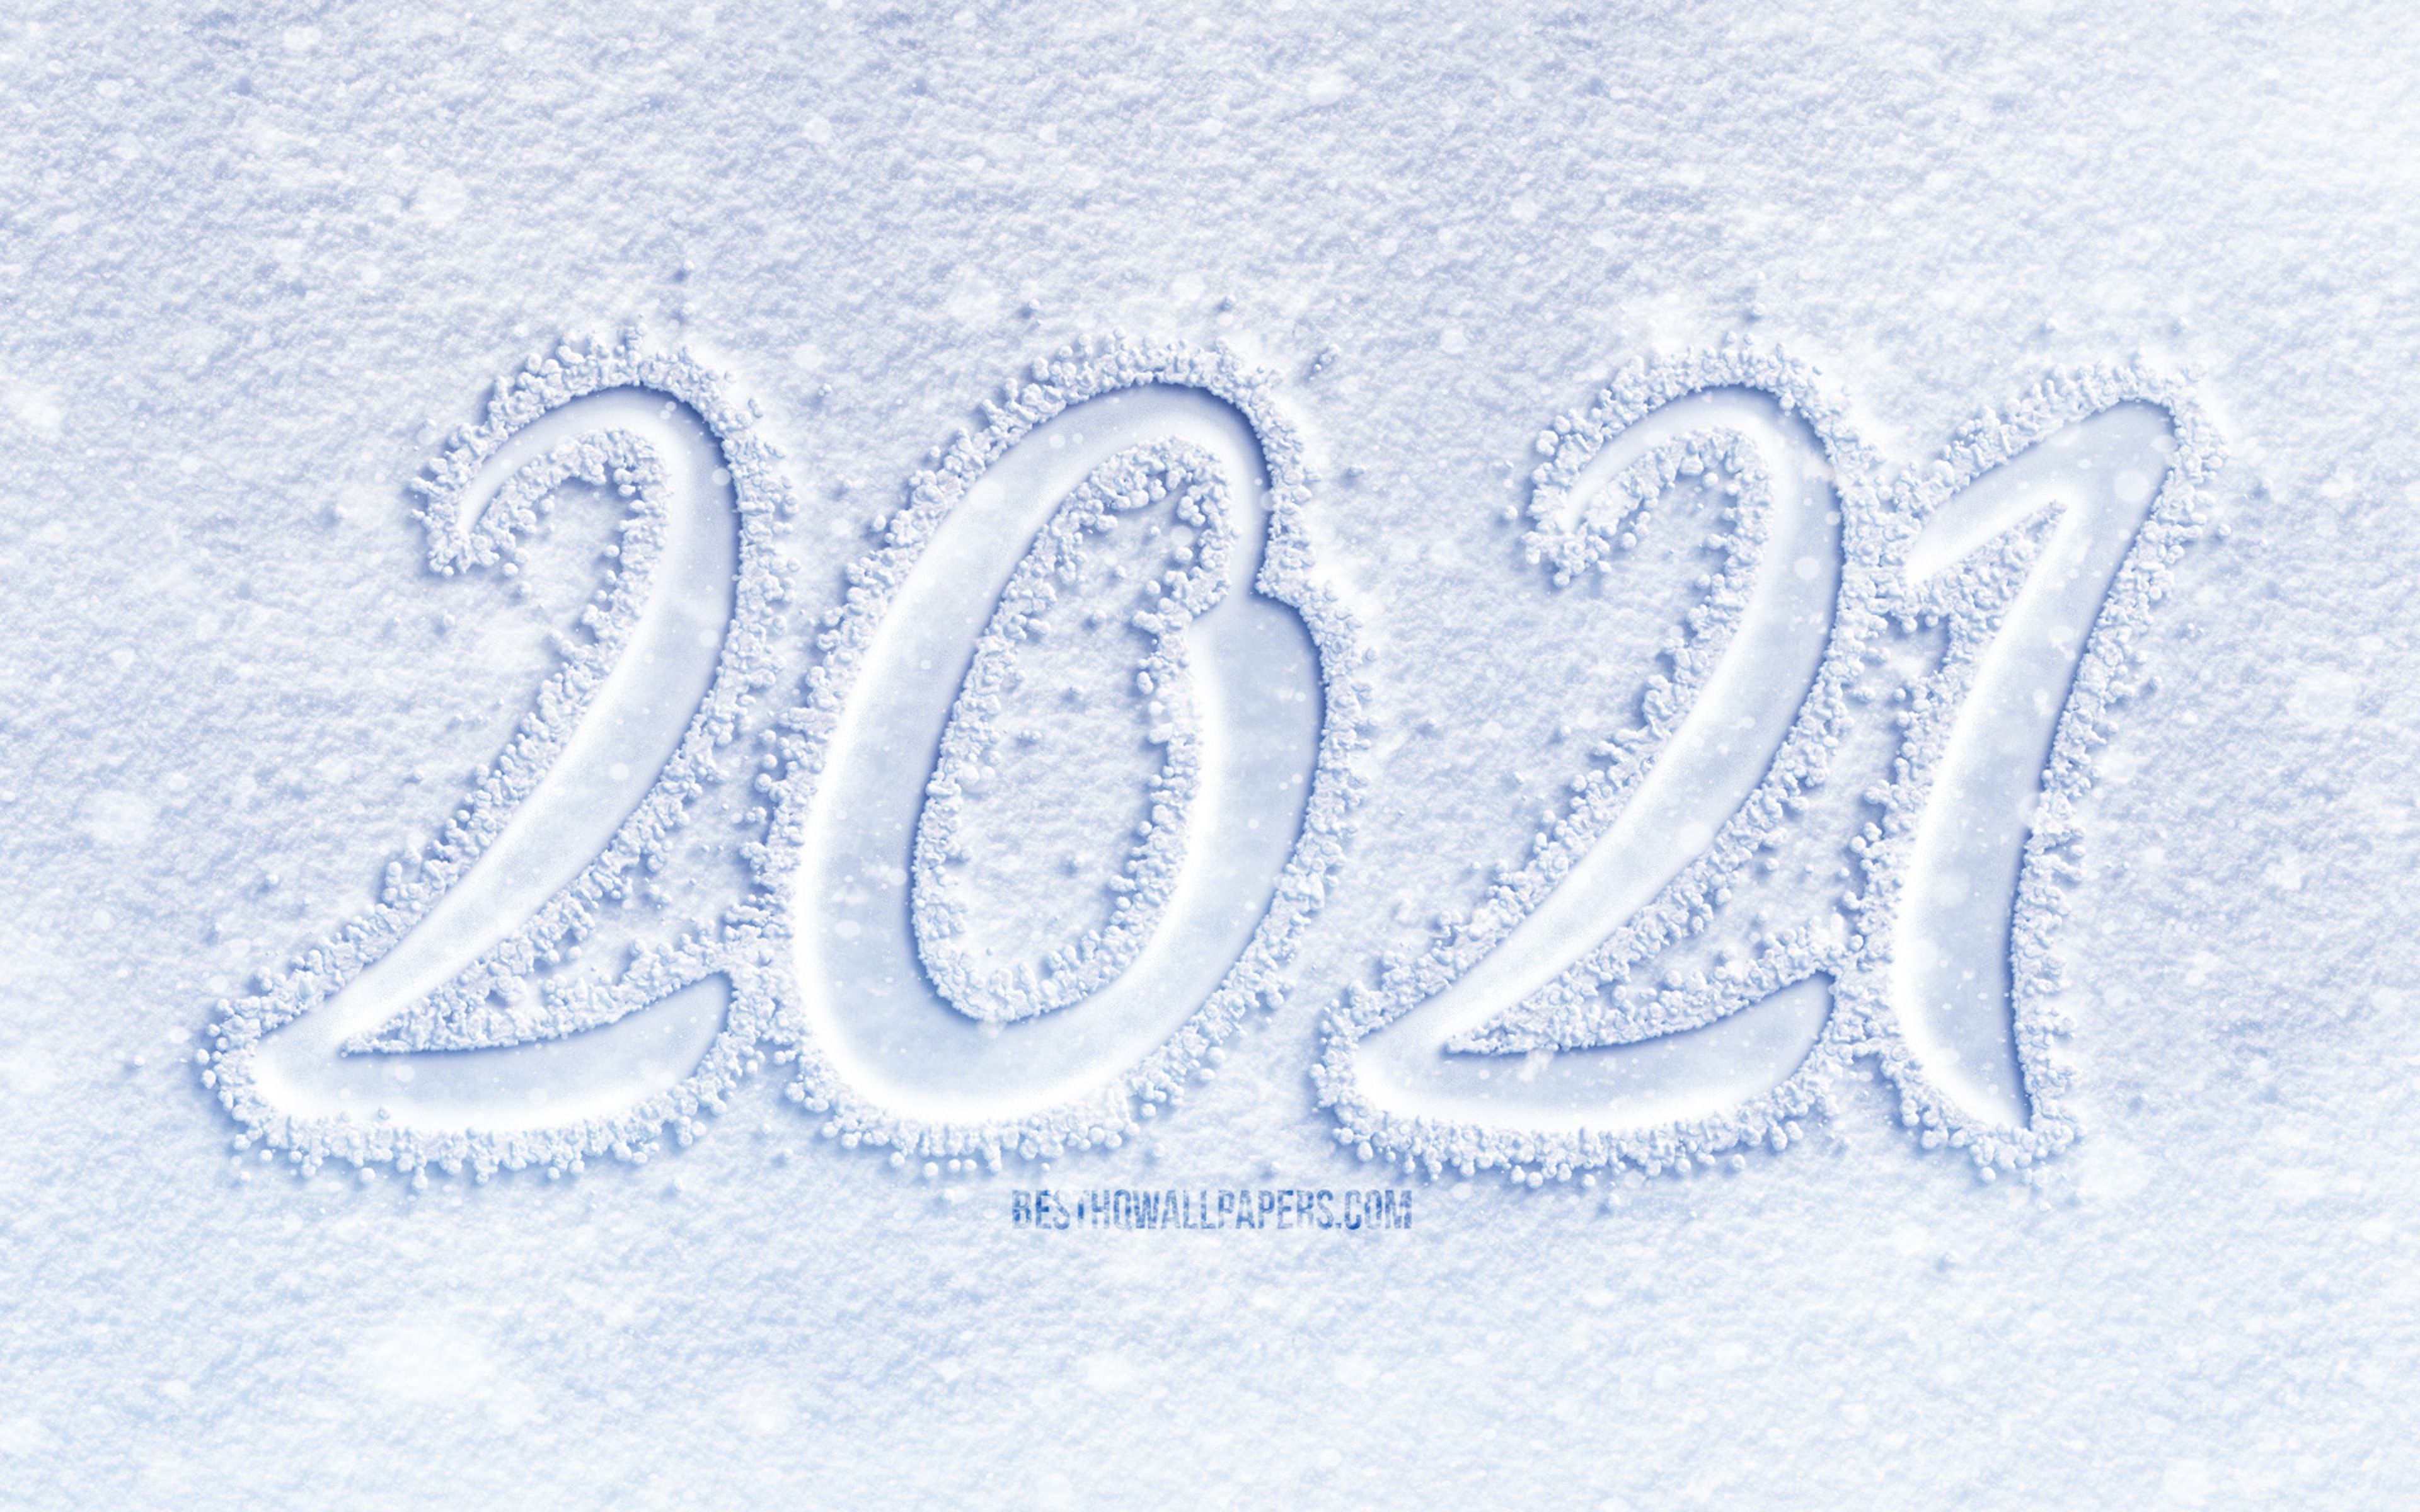 Download wallpapers 4k, Happy New Year 2021, white snow background, 2021 snow digits, 2021 concepts, 2021 on snow background, 2021 year digits, 2021 white digits, 2021 New Year for desktop with resolution 3840x2400. High Quality HD pictures wallpapers